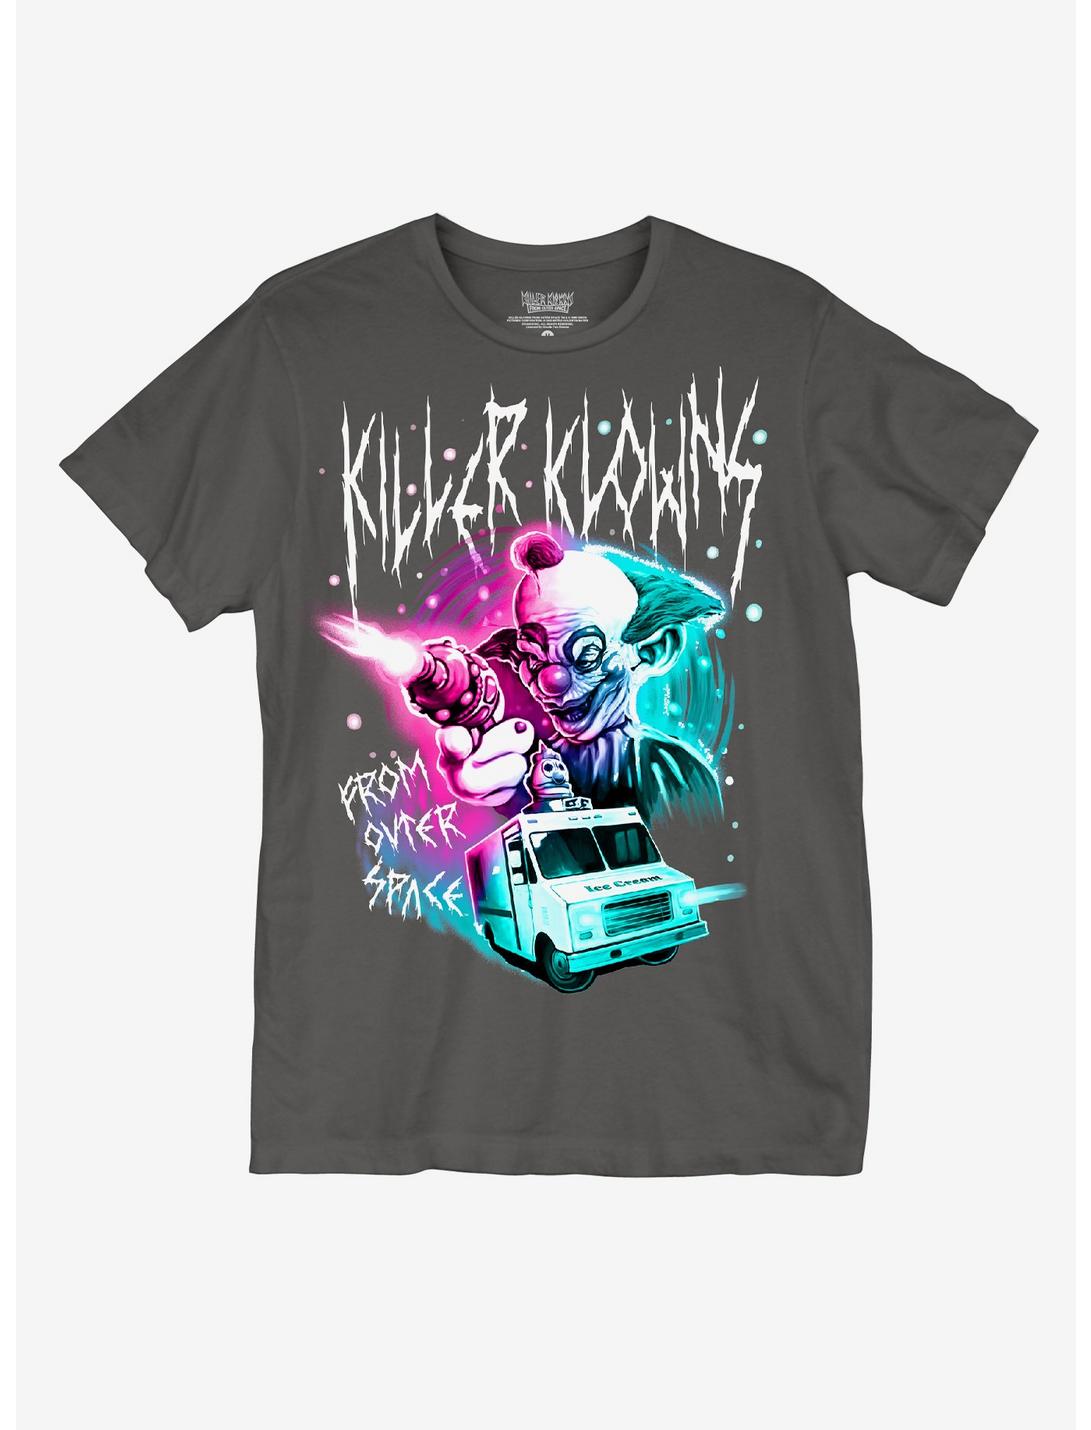 Killer Klowns From Outer Space Shorty Tonal Boyfriend Fit Girls T-Shirt, MULTI, hi-res